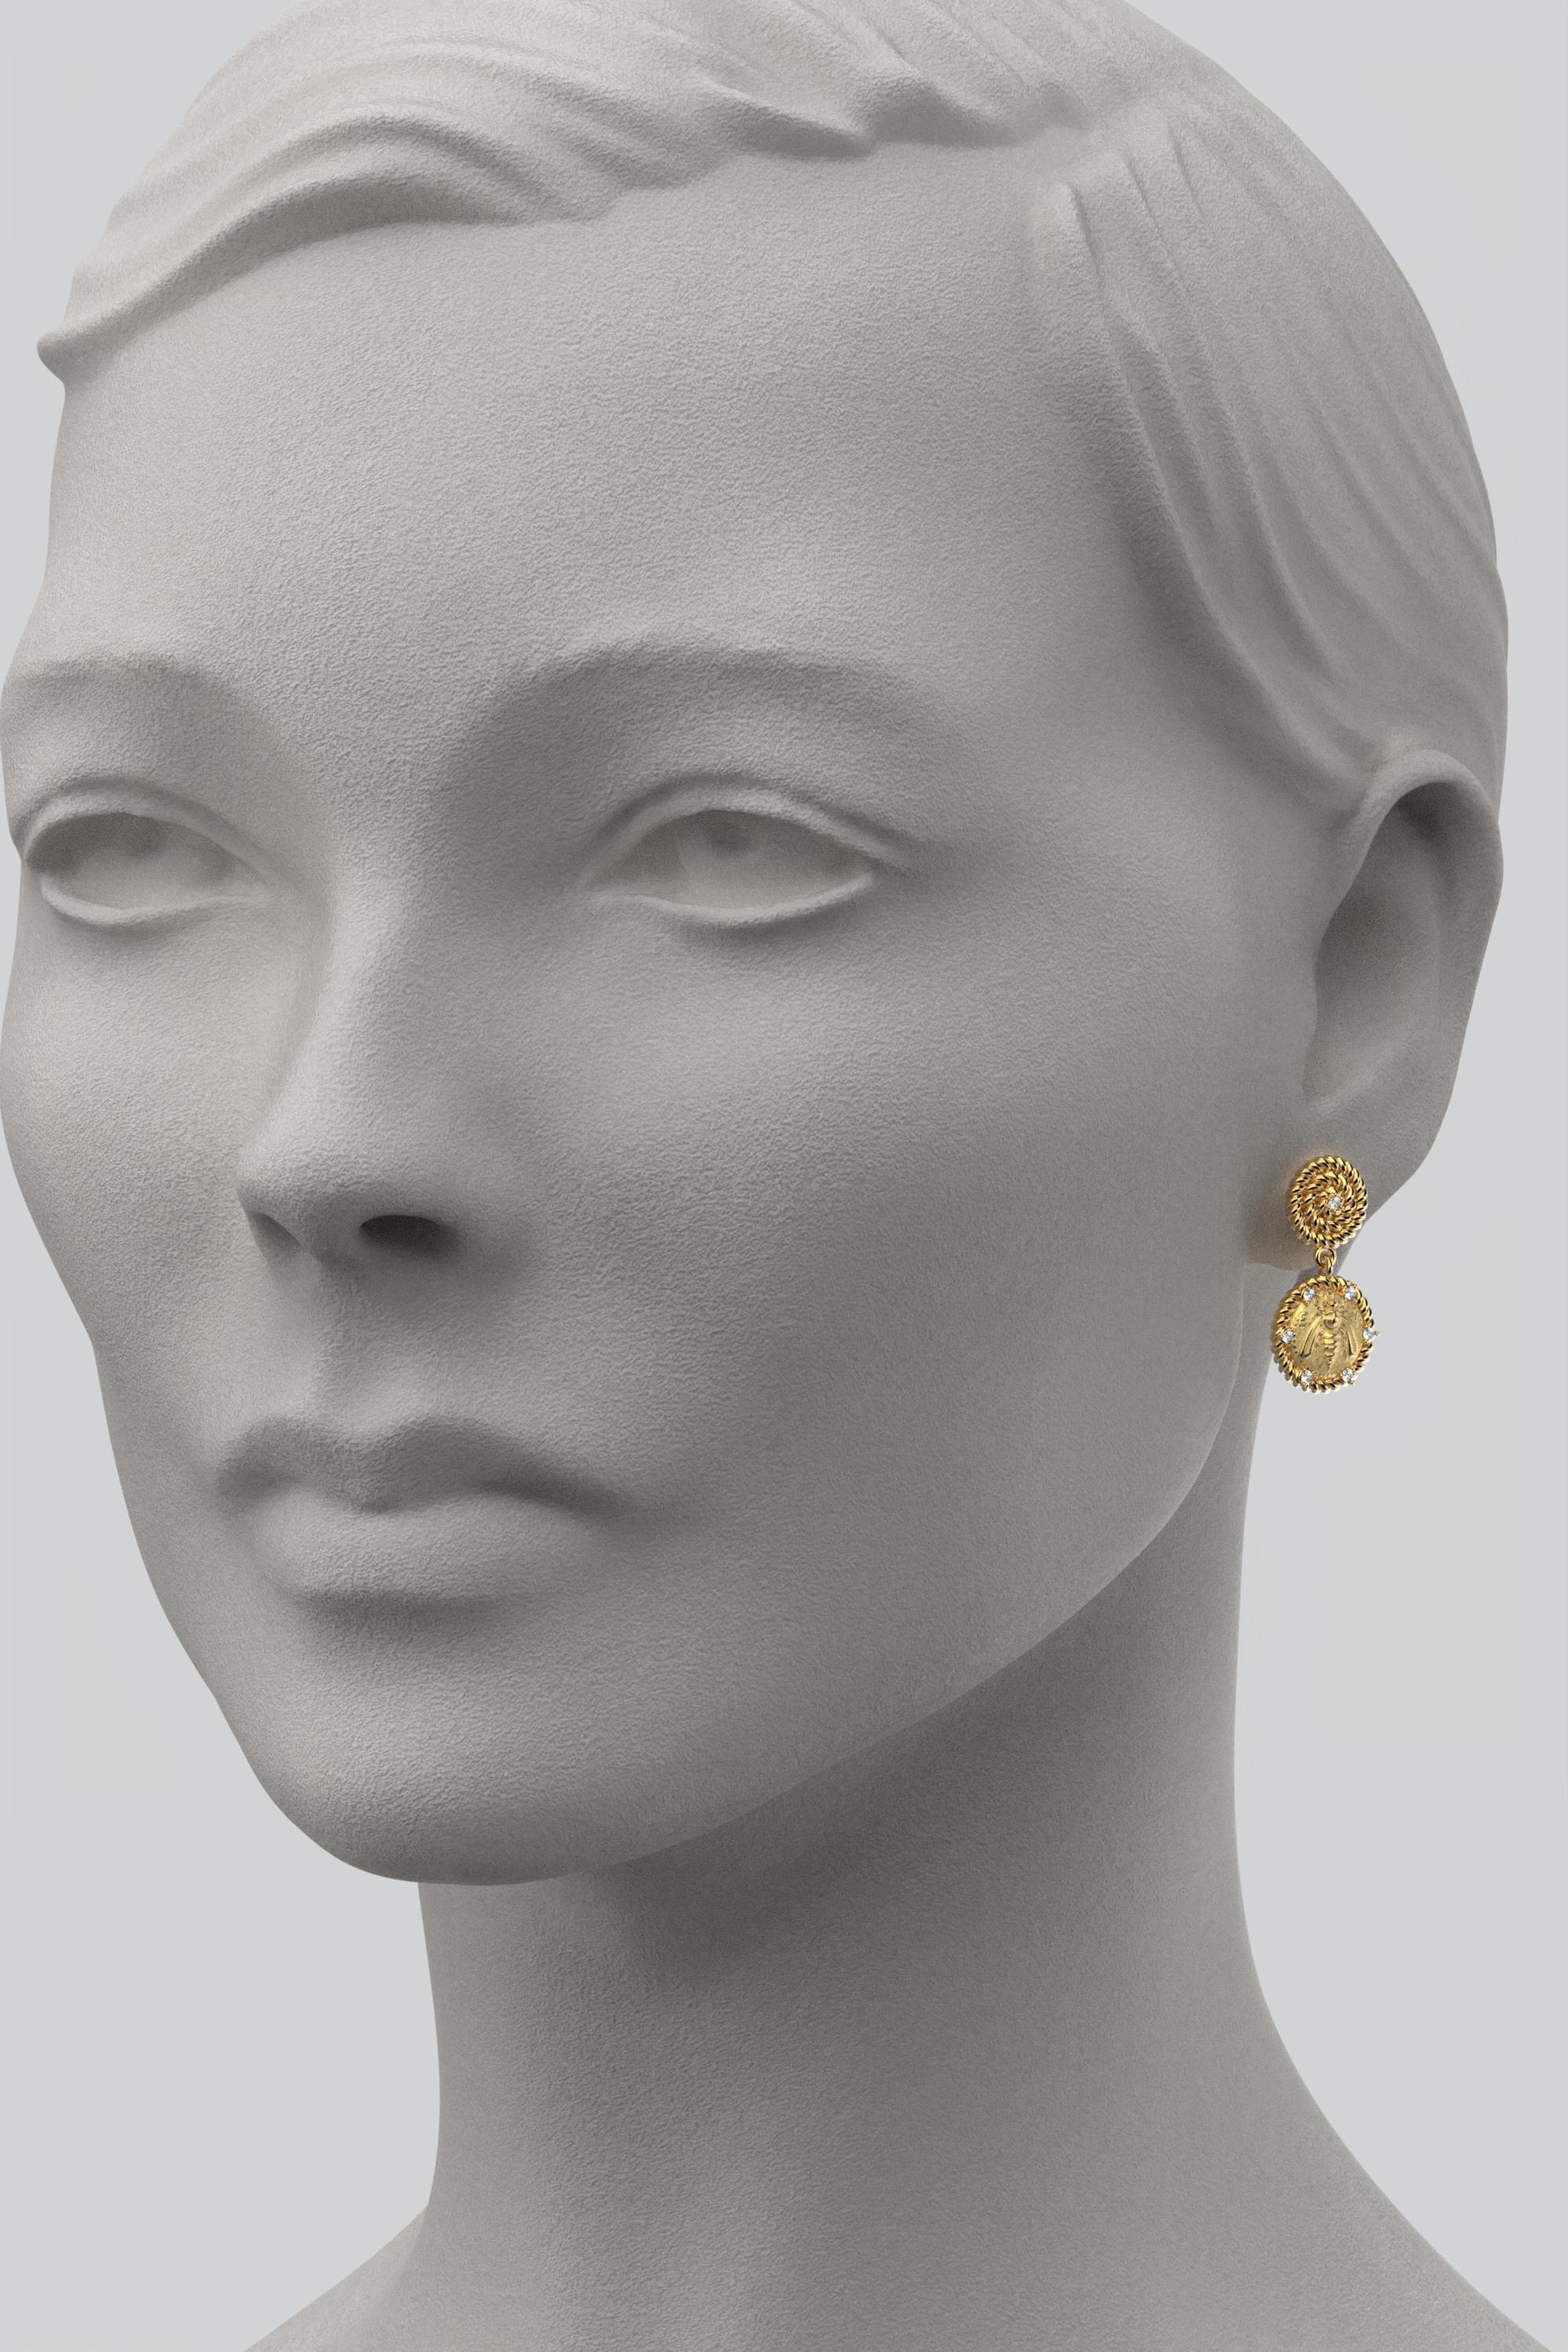 Italian Jewelry | 18k Gold Dangle Earrings With Diamonds | Bee Earrings  In New Condition For Sale In Camisano Vicentino, VI